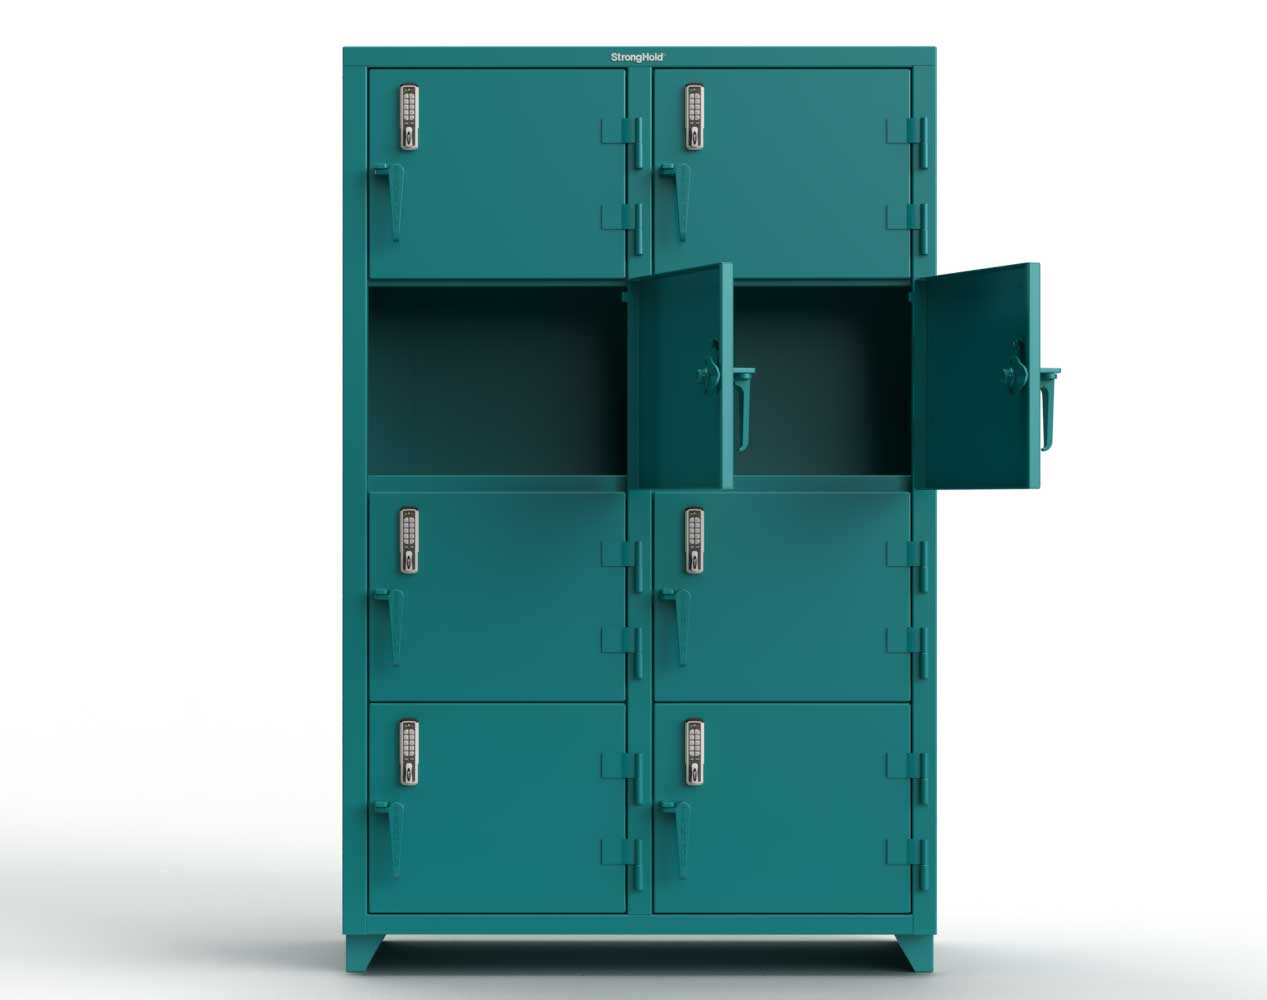 Extra Heavy Duty 14 GA 4-Tier Locker with Keyless Entry Lock, 8 Compartments - 48 in. W x 24 in. D x 75 in. H